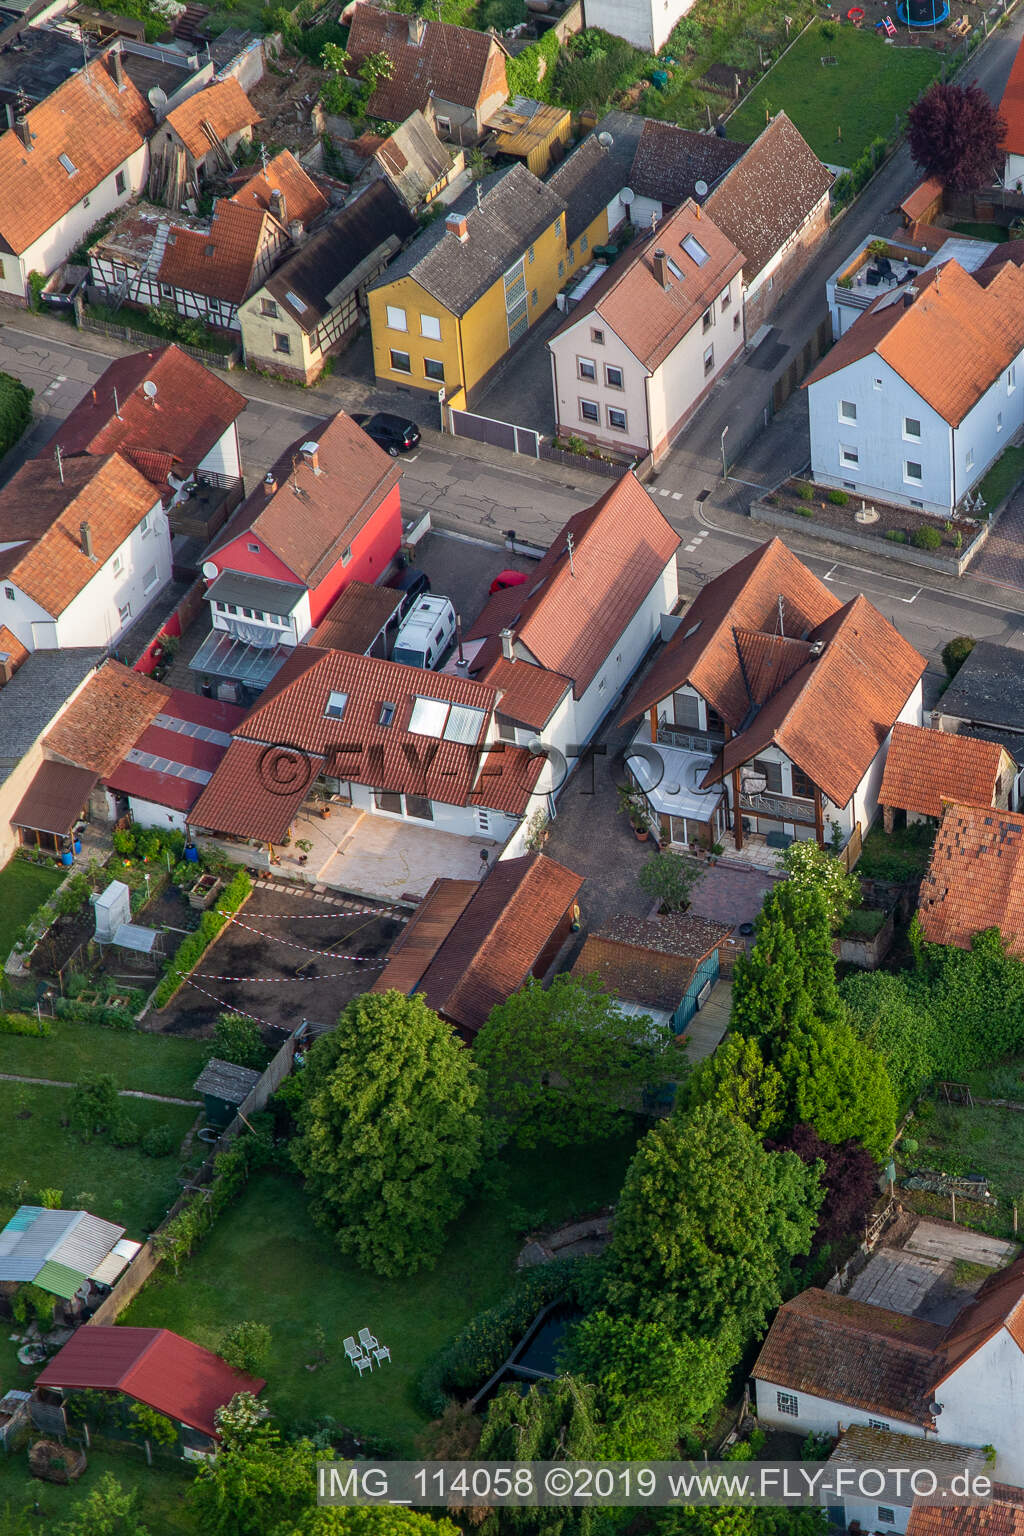 Drone recording of Freckenfeld in the state Rhineland-Palatinate, Germany